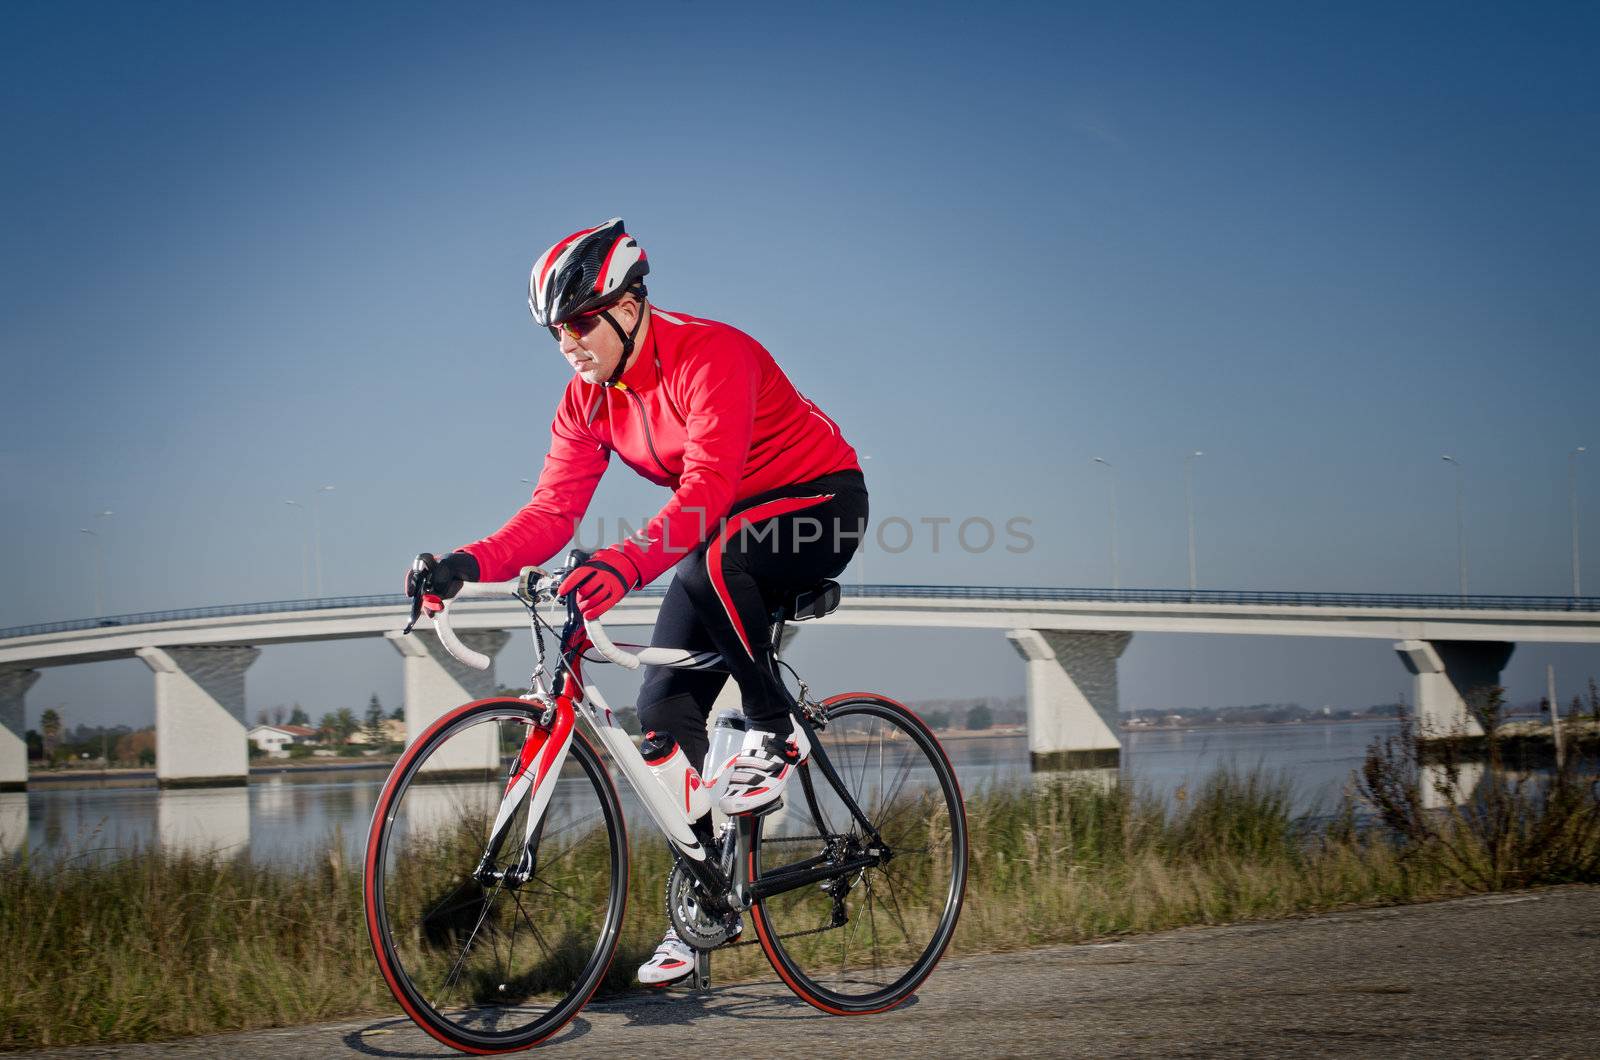 Man on road bike riding down open country road, bridge on background.